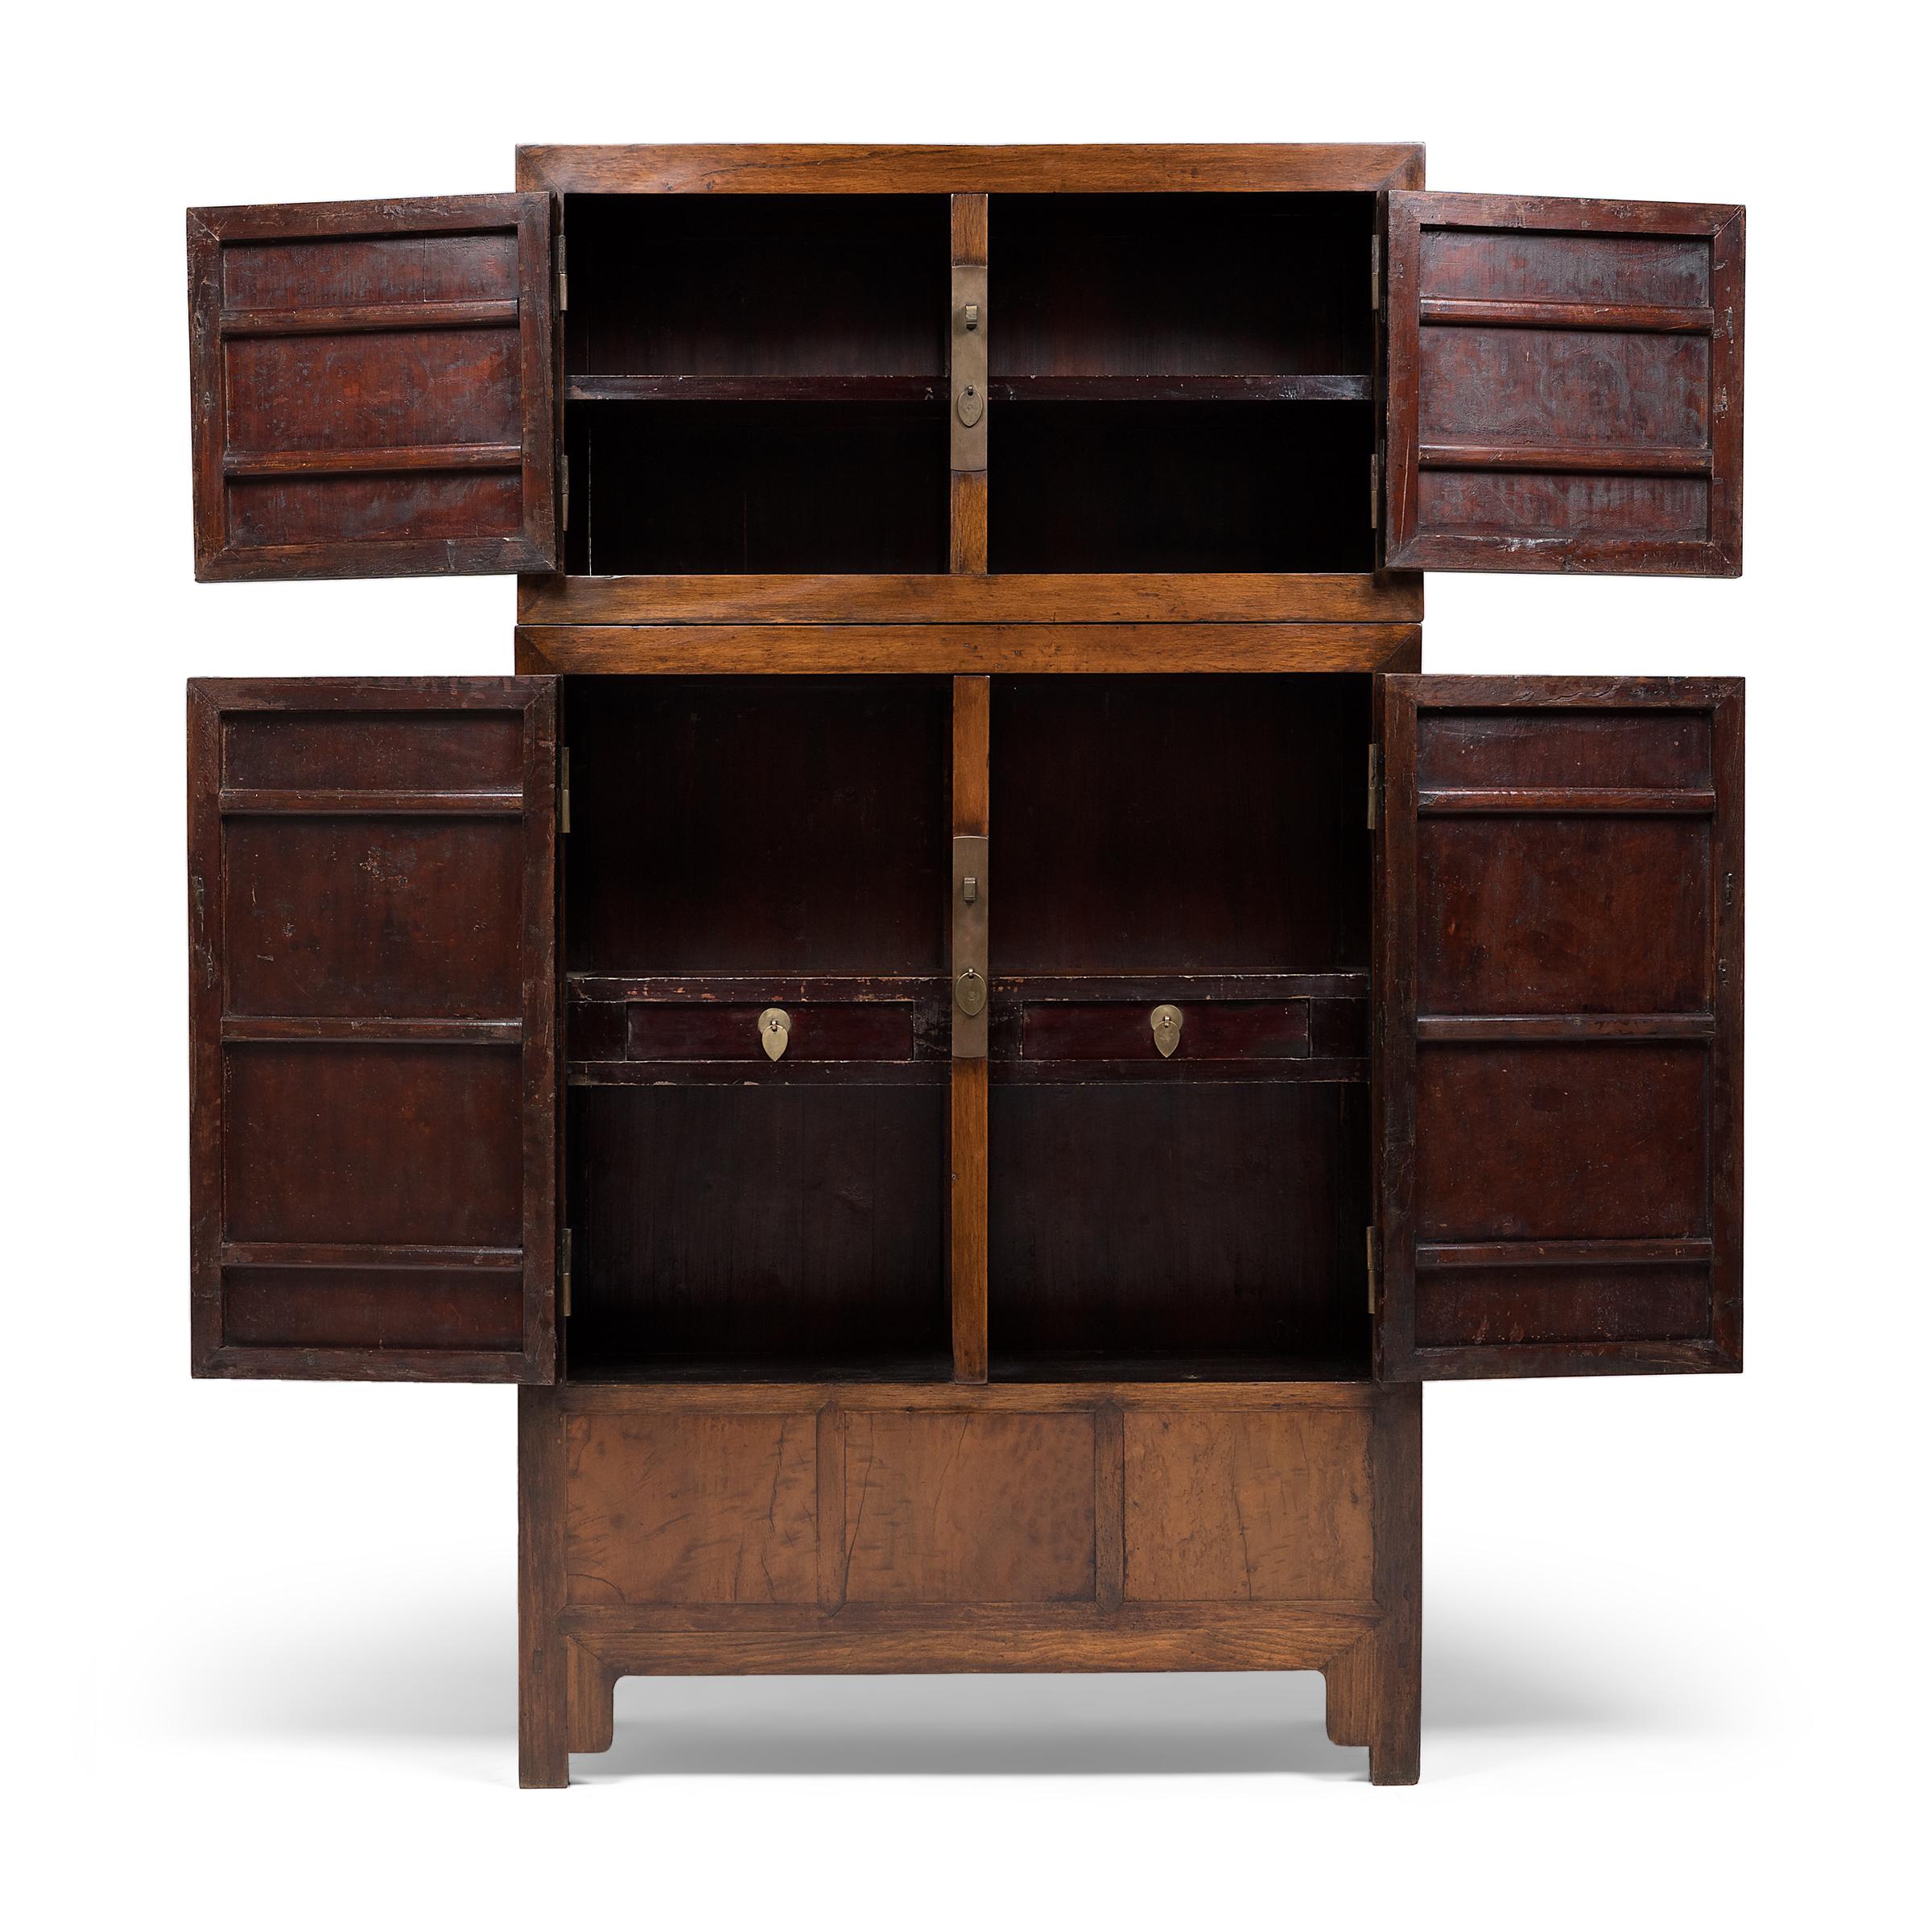 Pair of Chinese Camphor Burl Compound Cabinets, c. 1850 For Sale 9